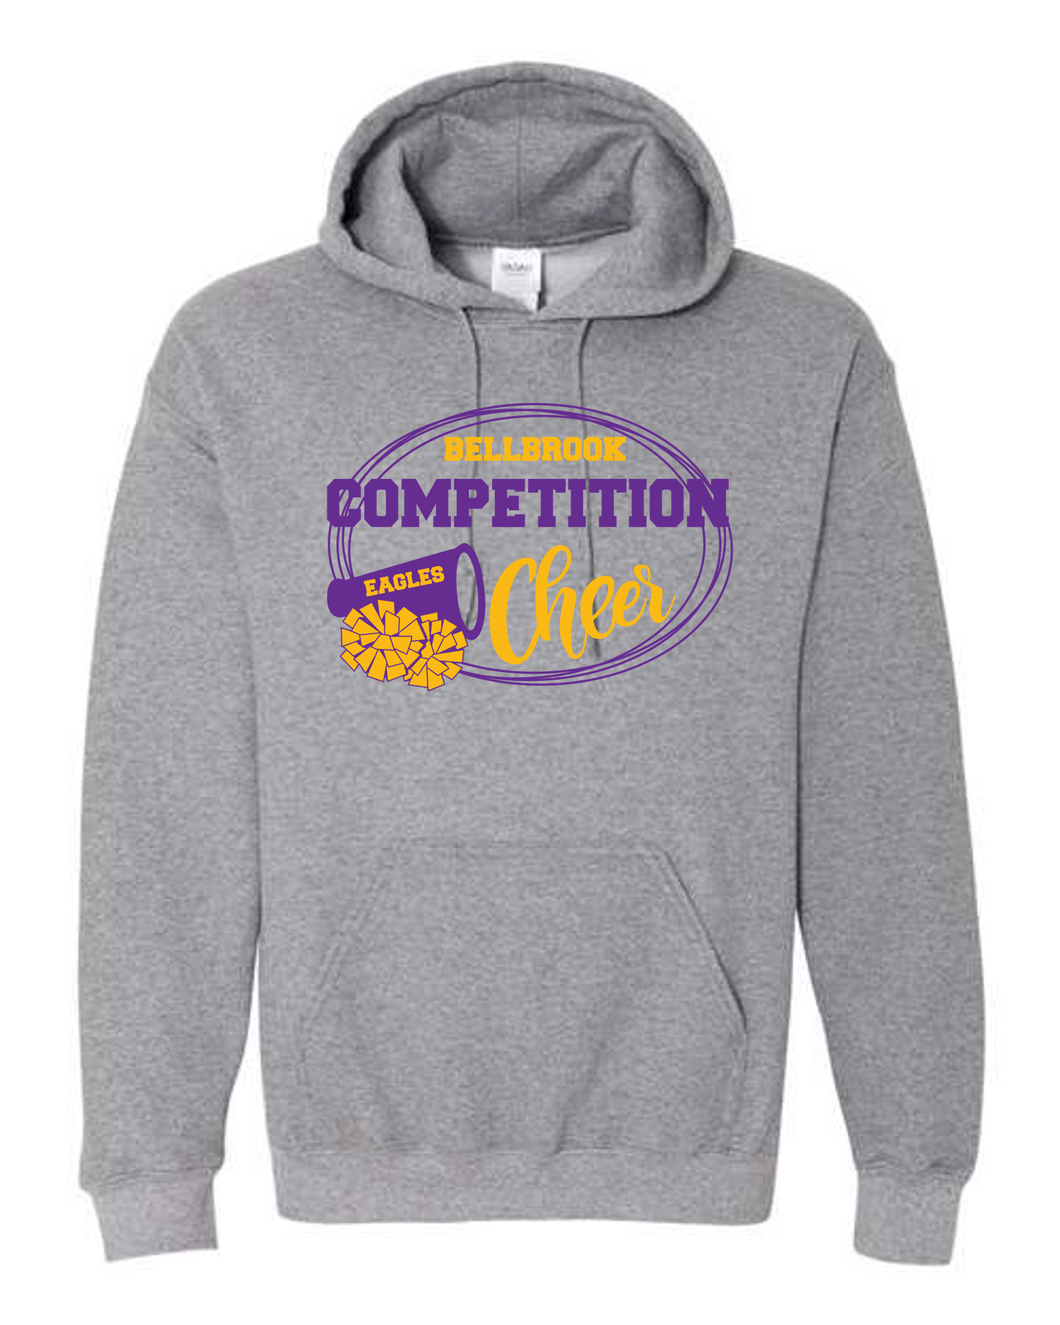 Competition Cheer Megaphone Graphite Heather Hoodie